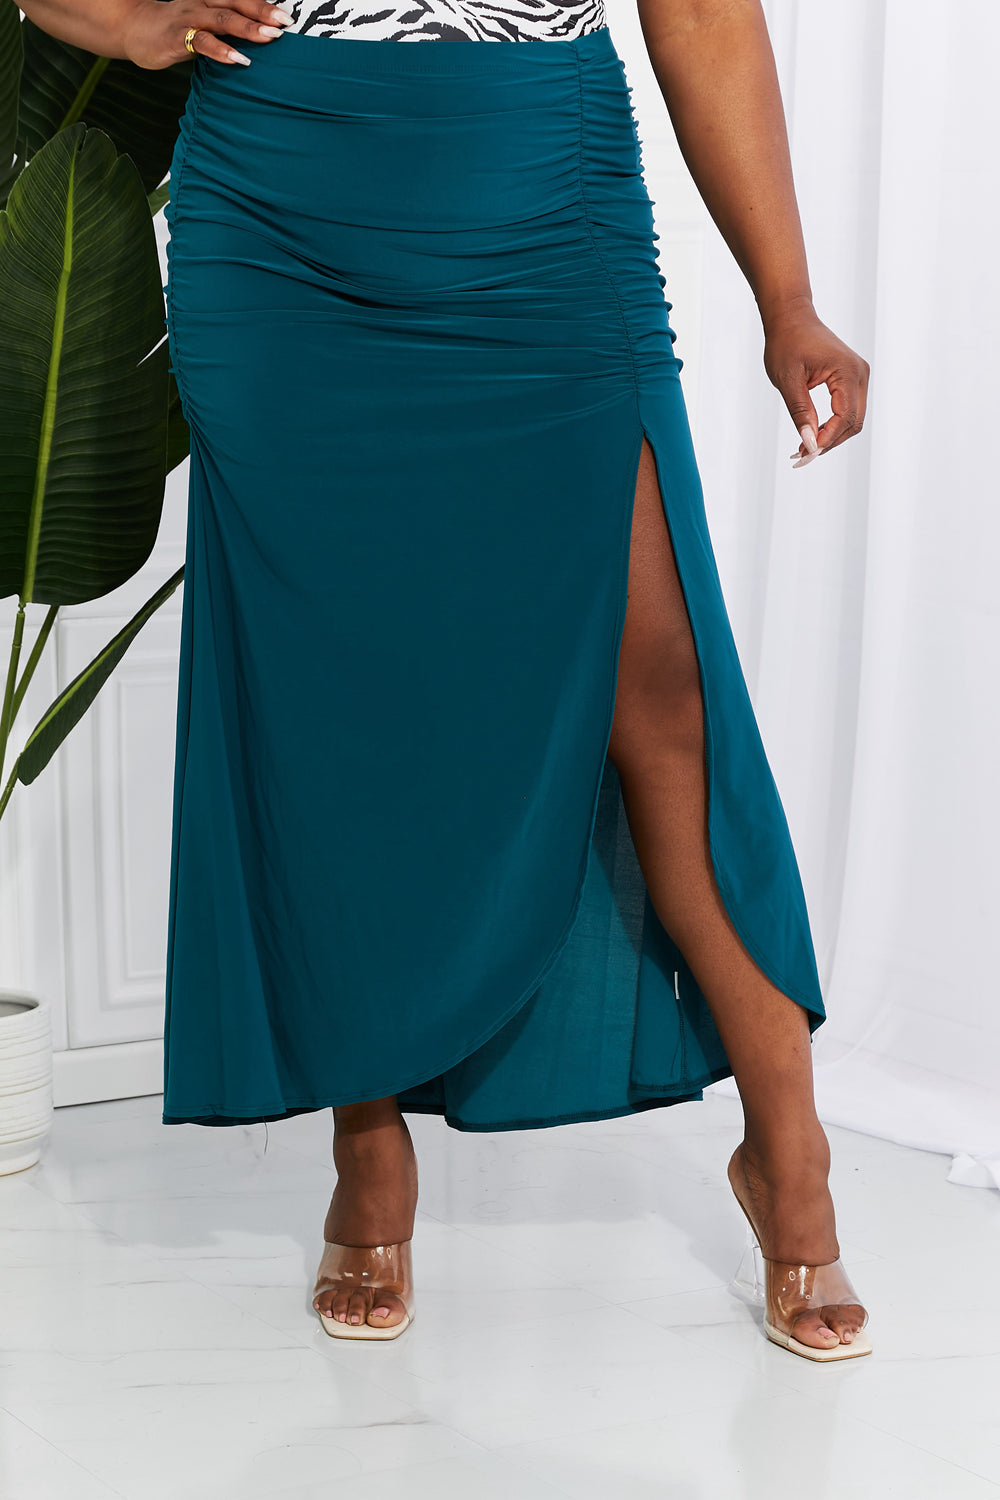 White Birch Full Size Up and Up Ruched Slit Maxi Skirt in Teal (TB7) T